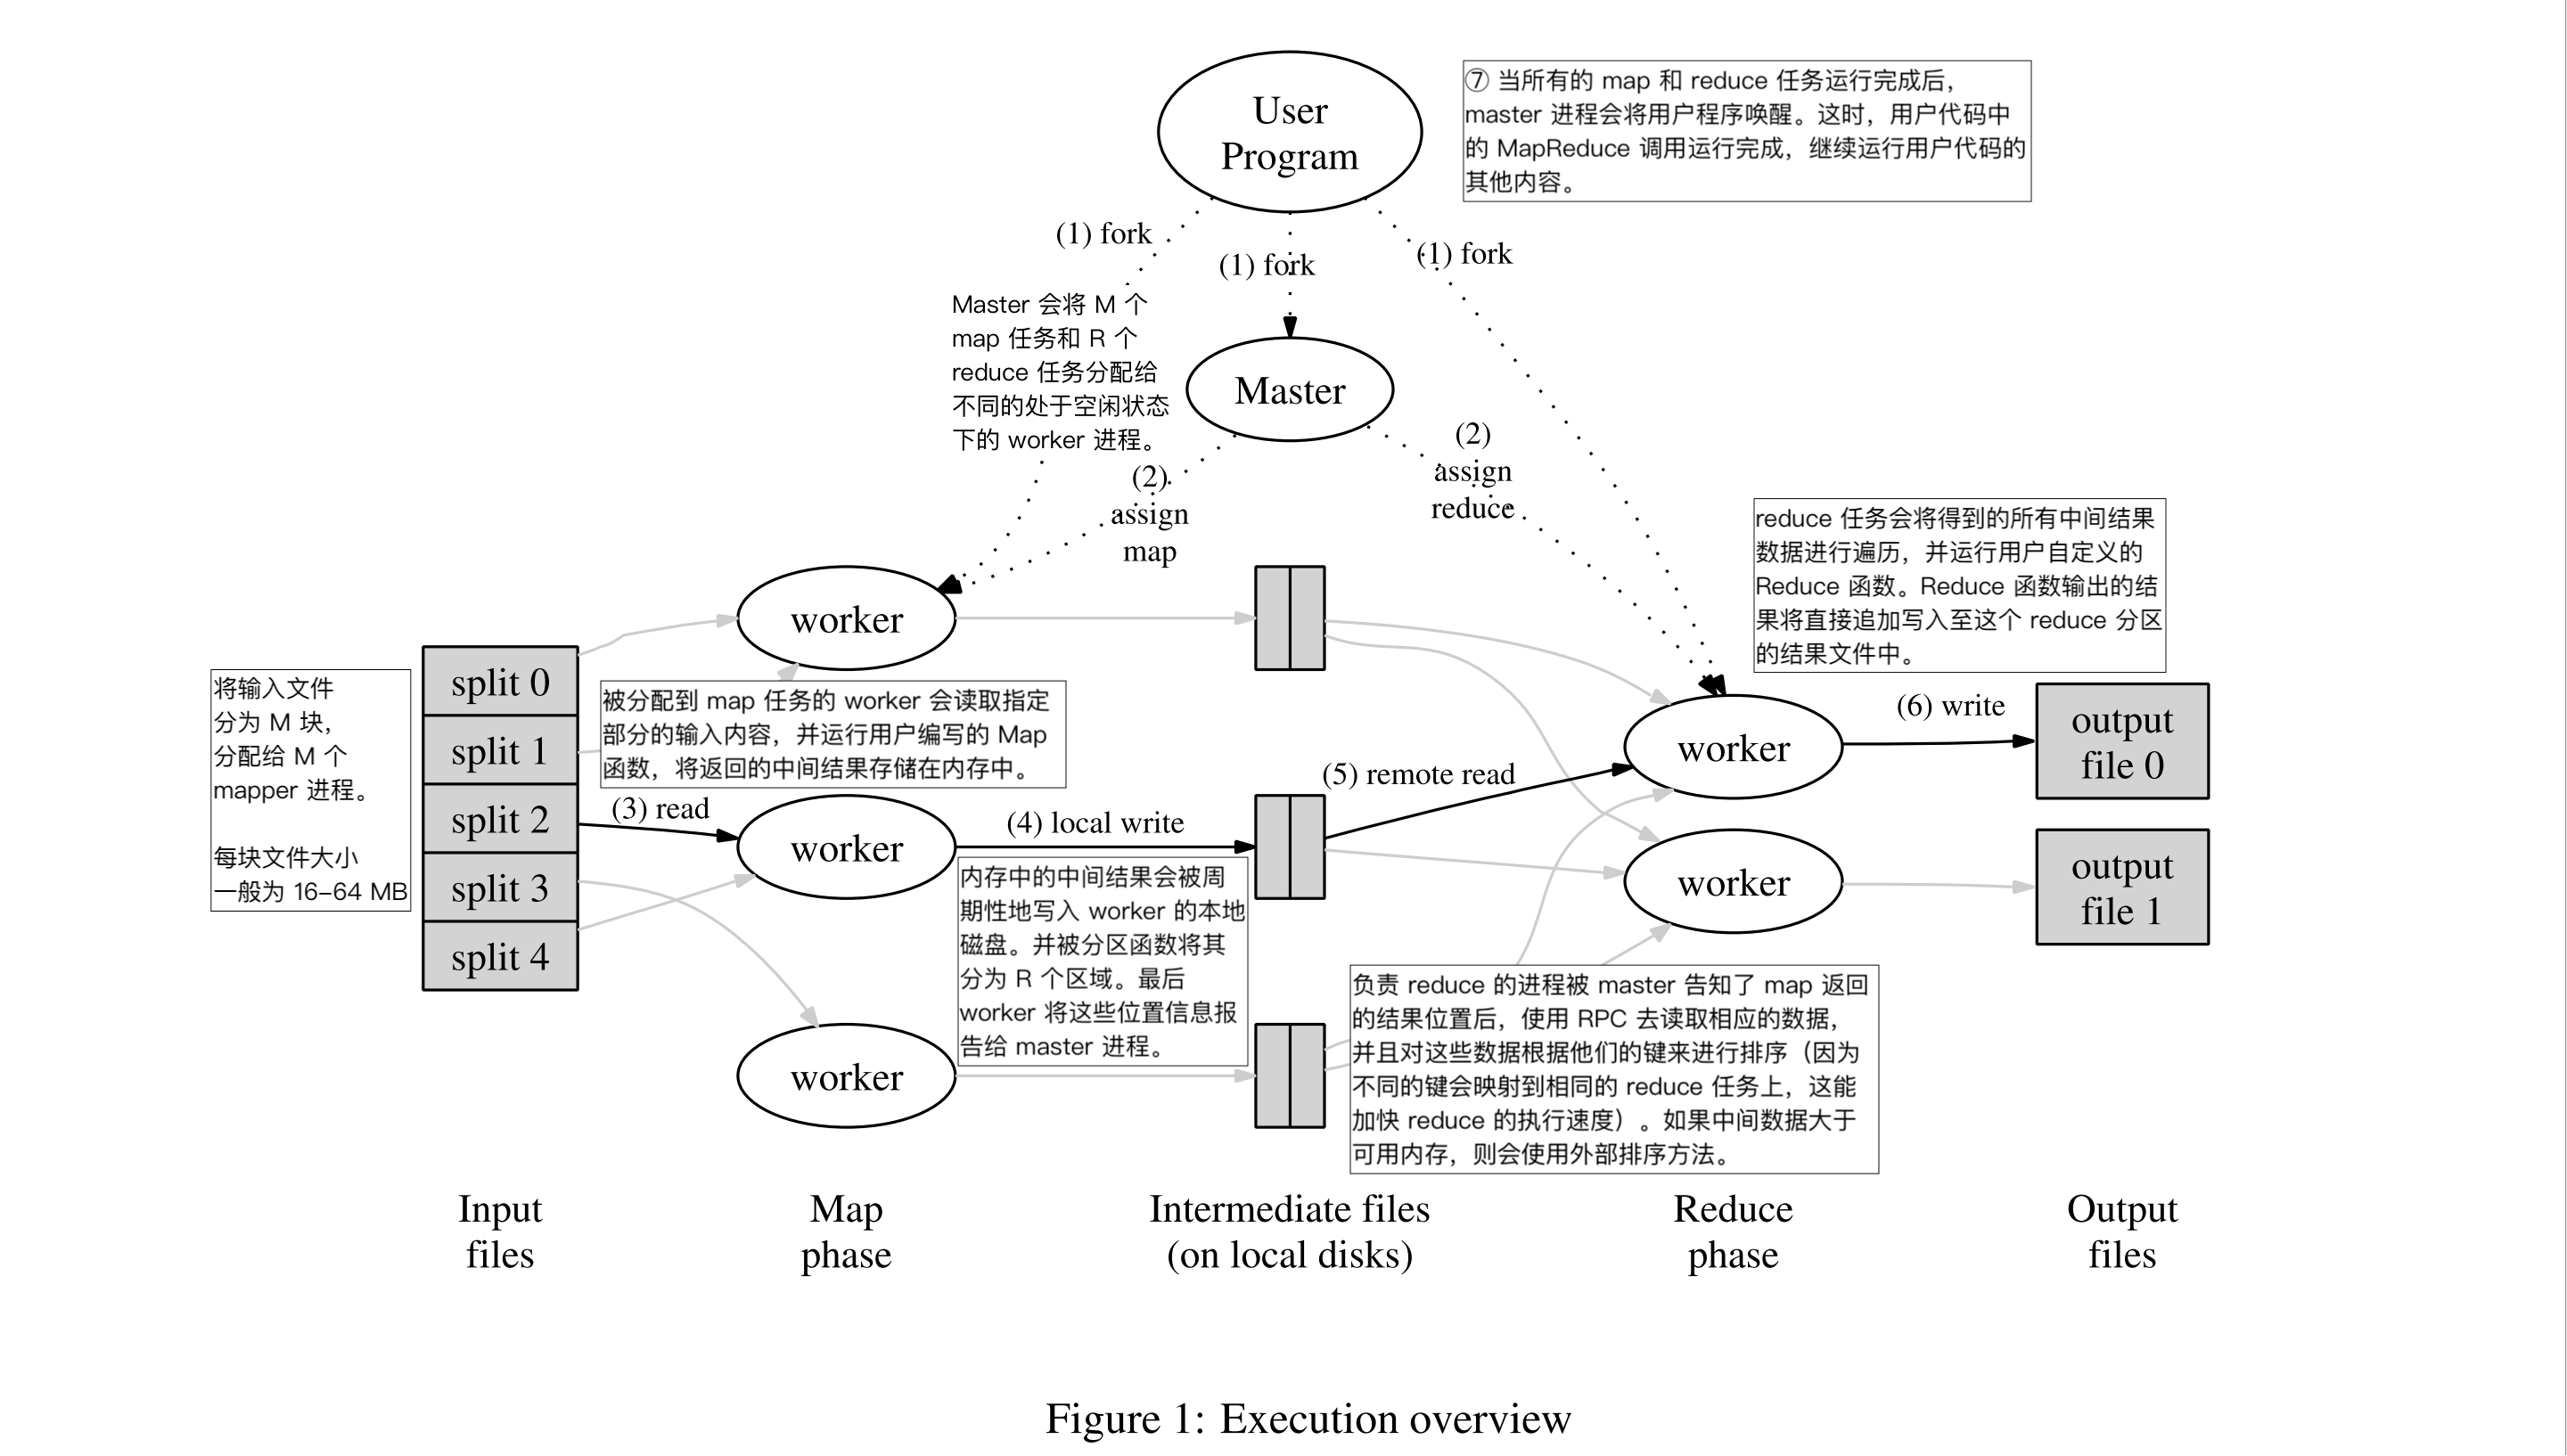 mapreduce-execution-overview